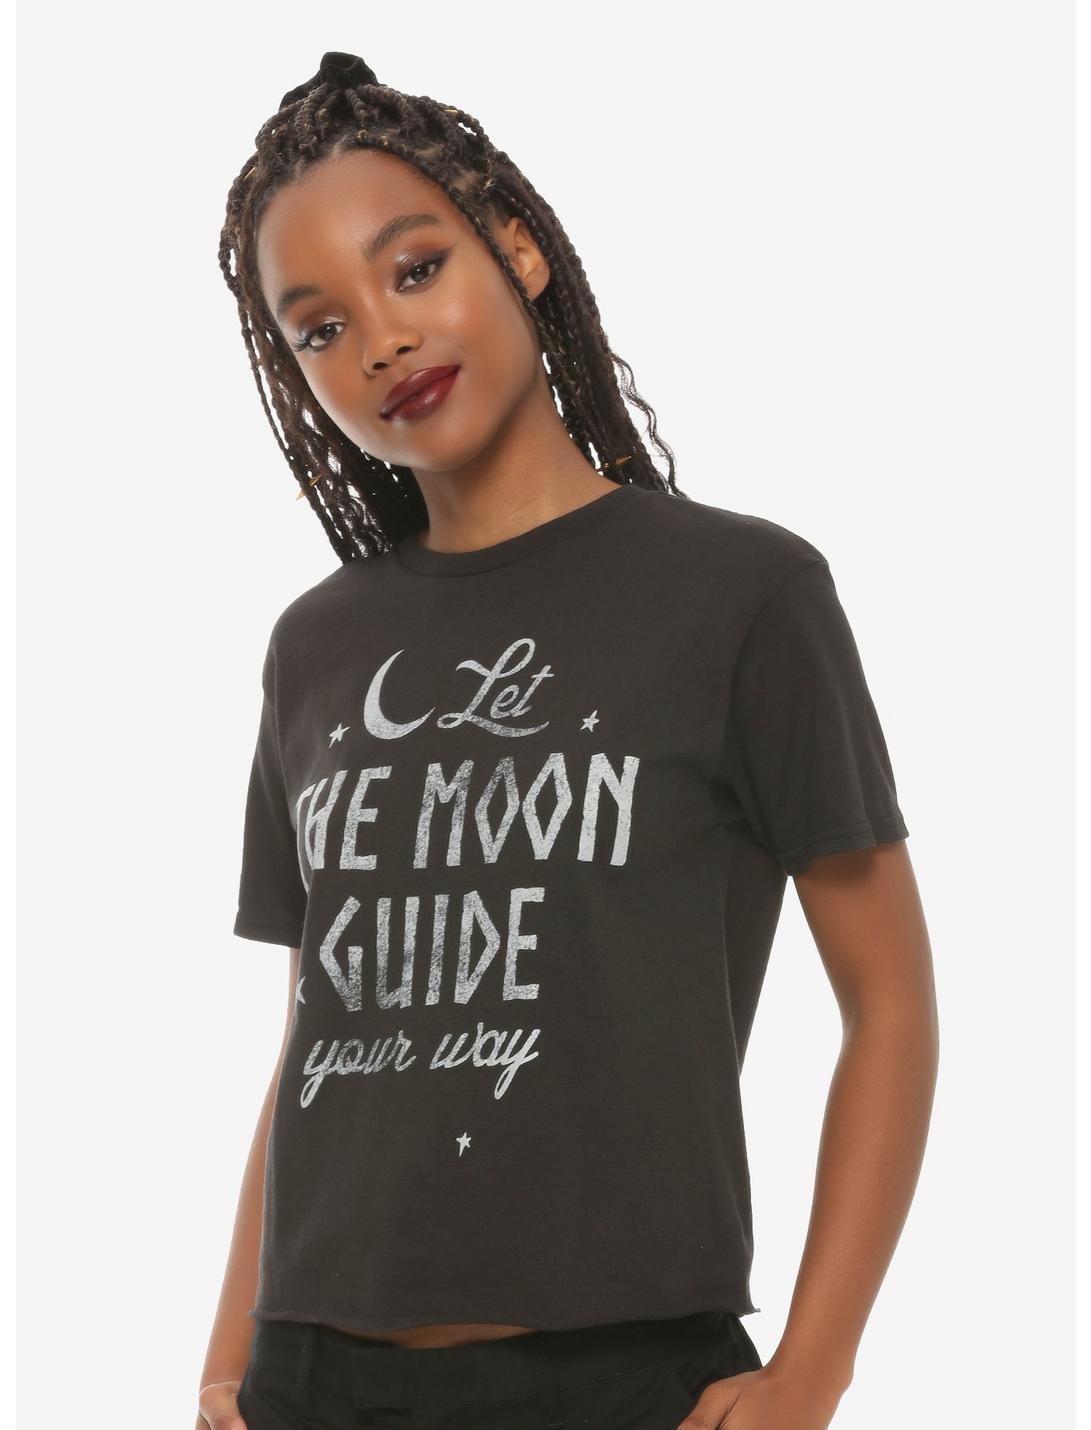 Let The Moon Guide Your Way Girls Crop T-Shirt, BLACK, hi-res